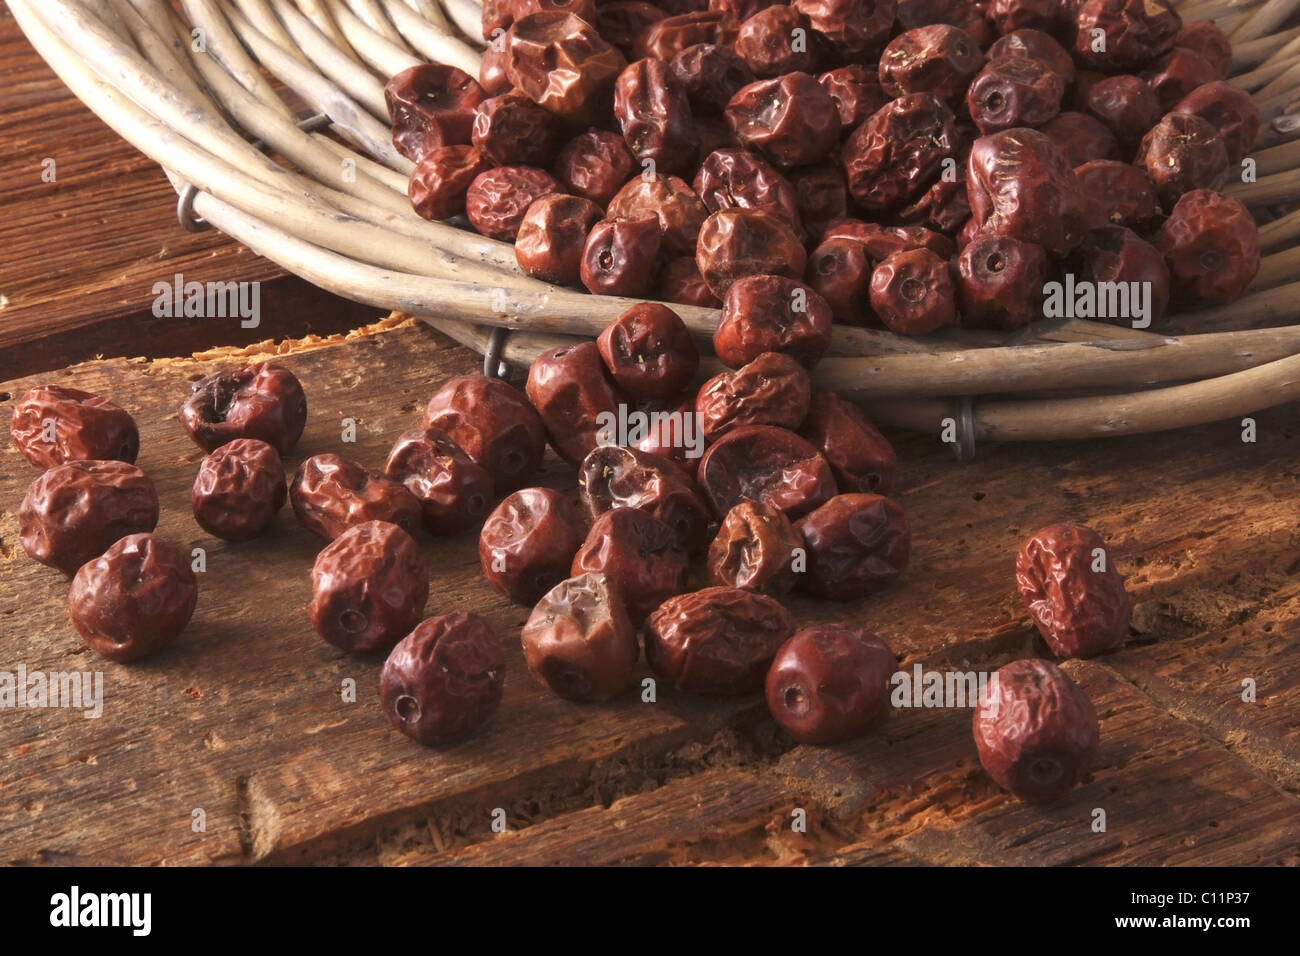 Dried Jujube berries (Ziziphus jujuba) as an ingredient for breakfast cereals, cakes and pastries, tipped out of a willow basket Stock Photo